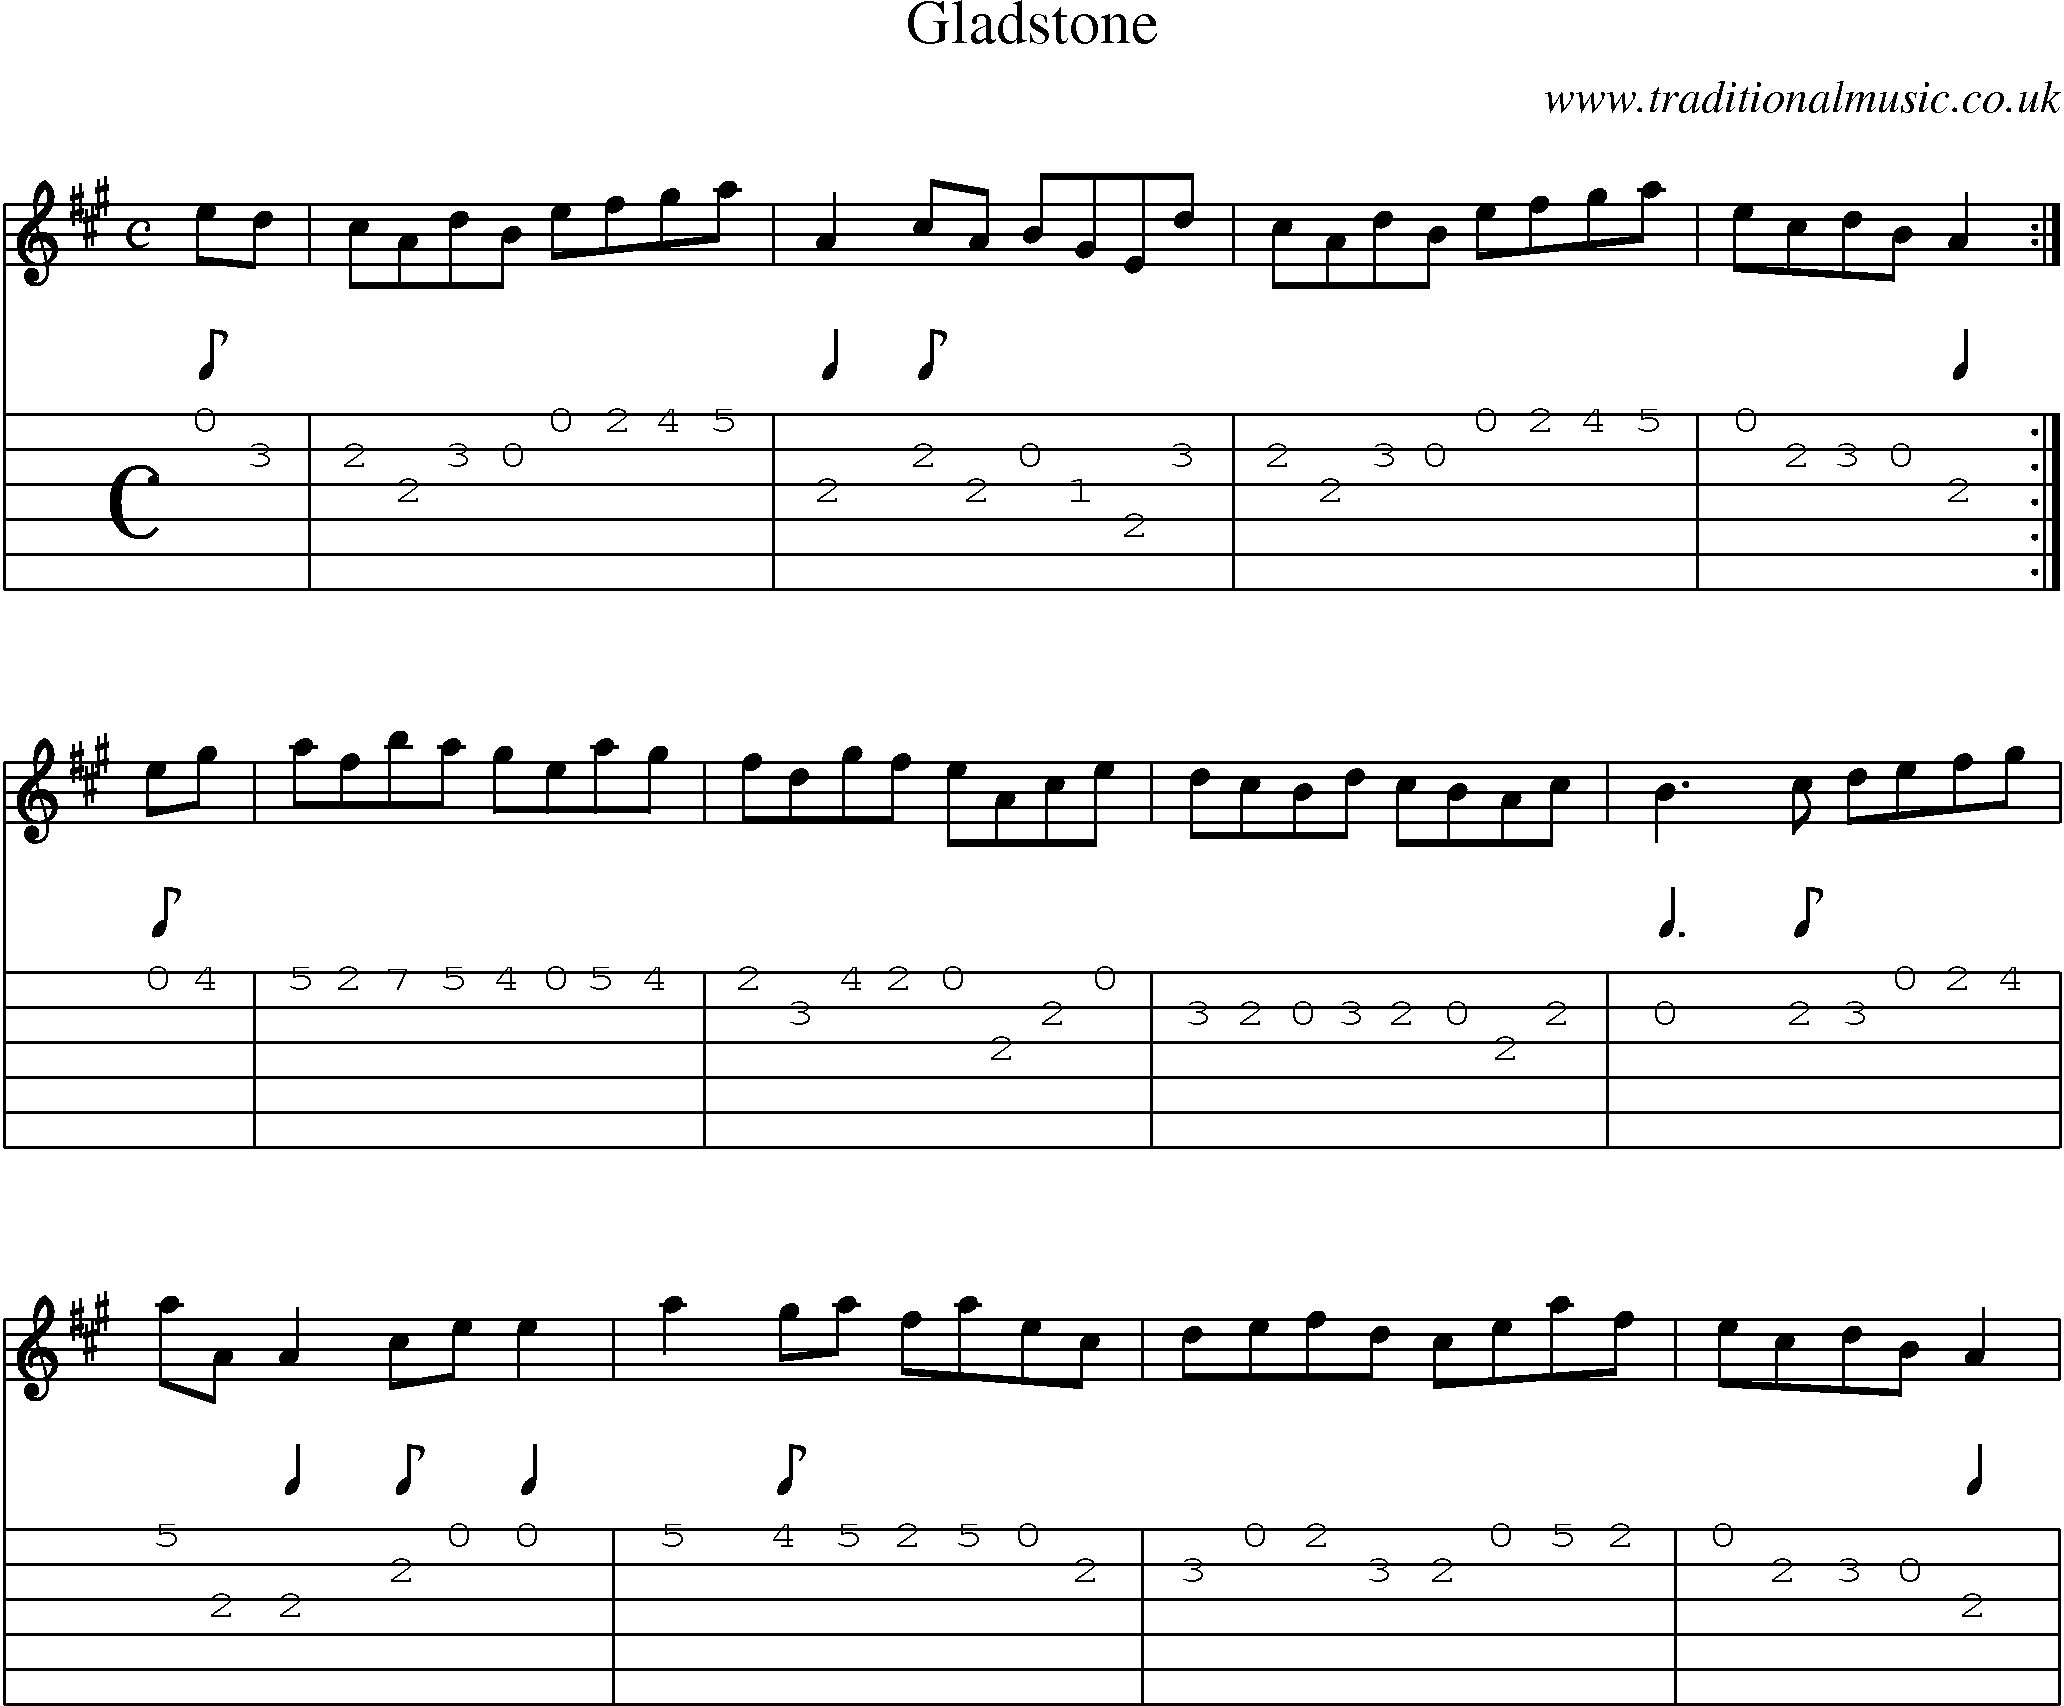 Music Score and Guitar Tabs for Gladstone